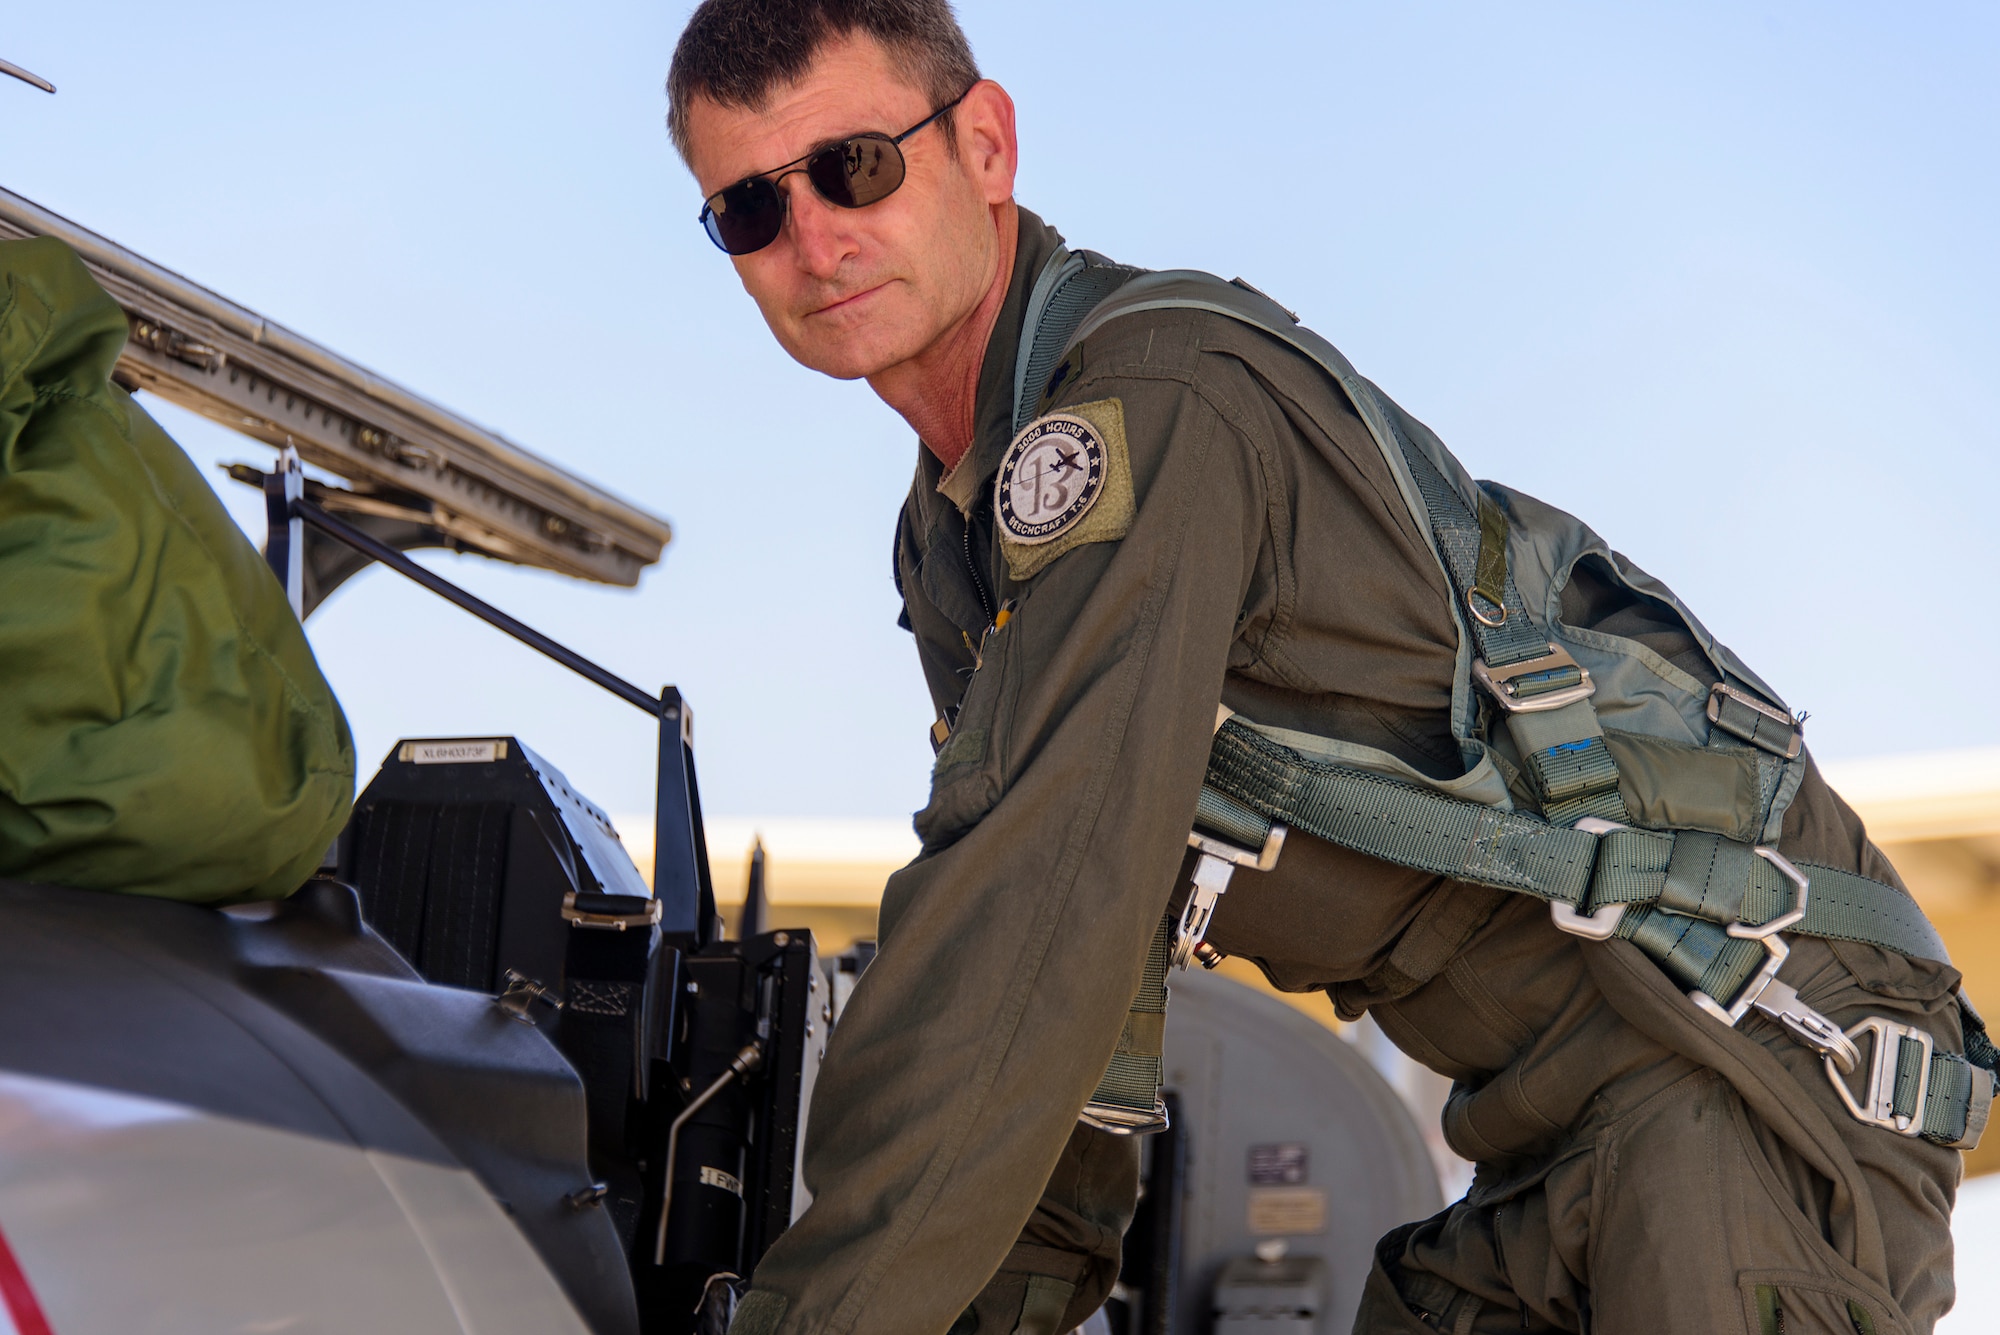 Instructor pilot retires after 33 years of service.